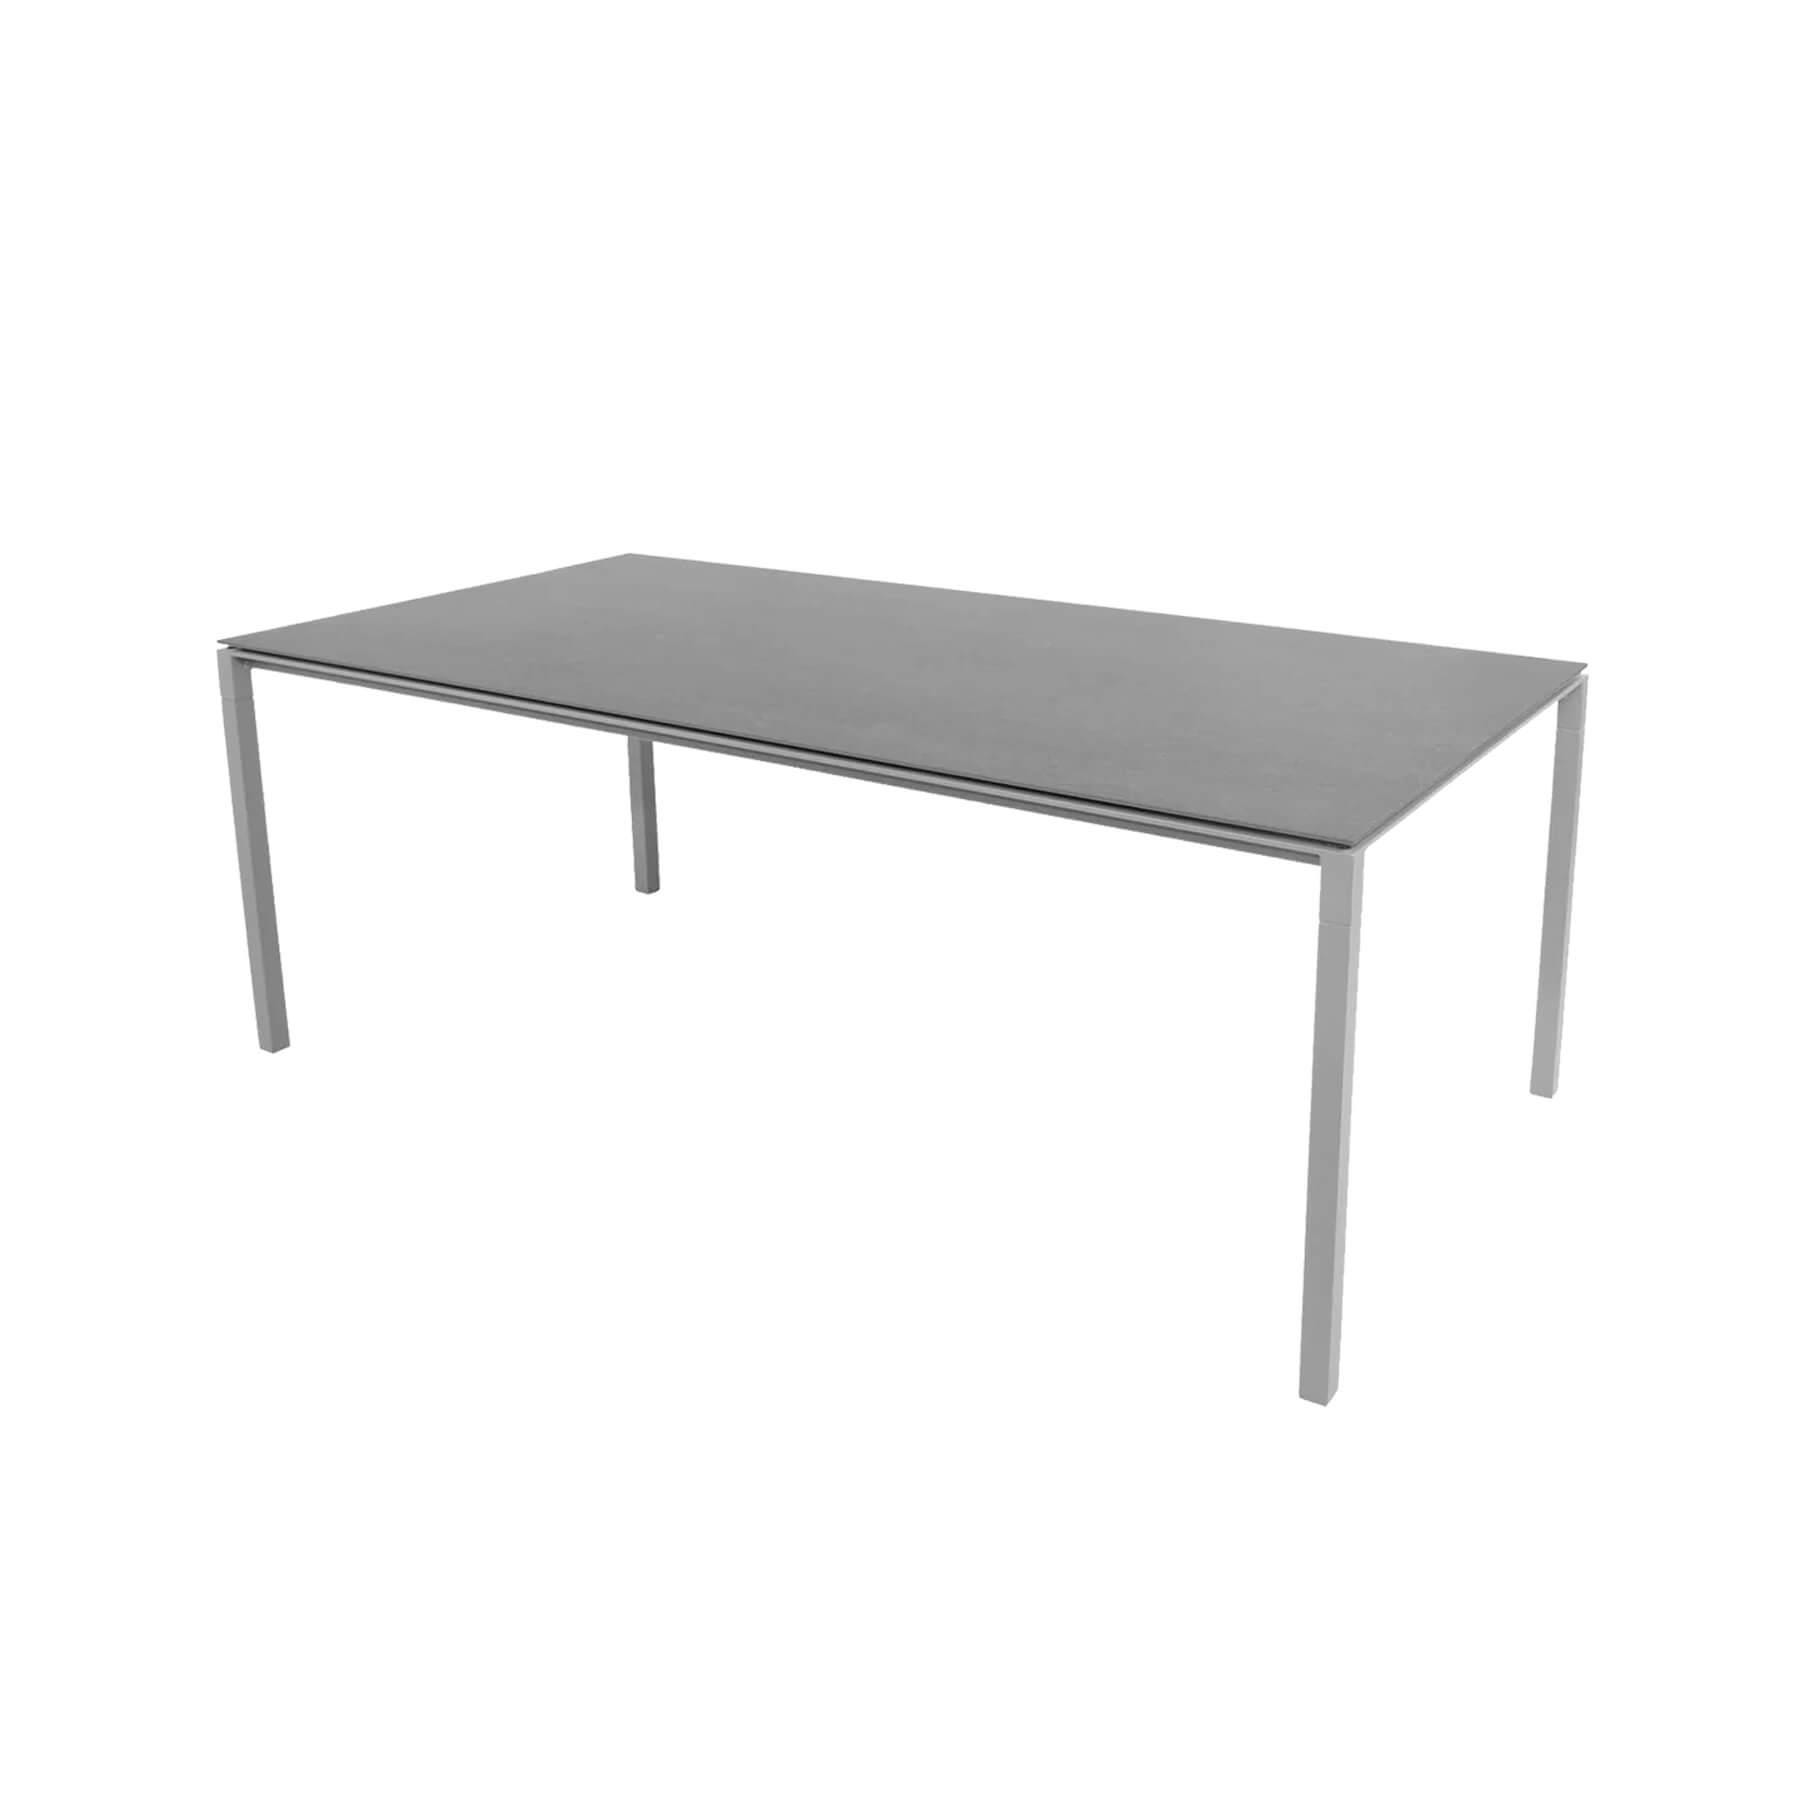 Caneline Pure Outdoor Dining Table Large Ceramic Basalt Top Light Grey Legs